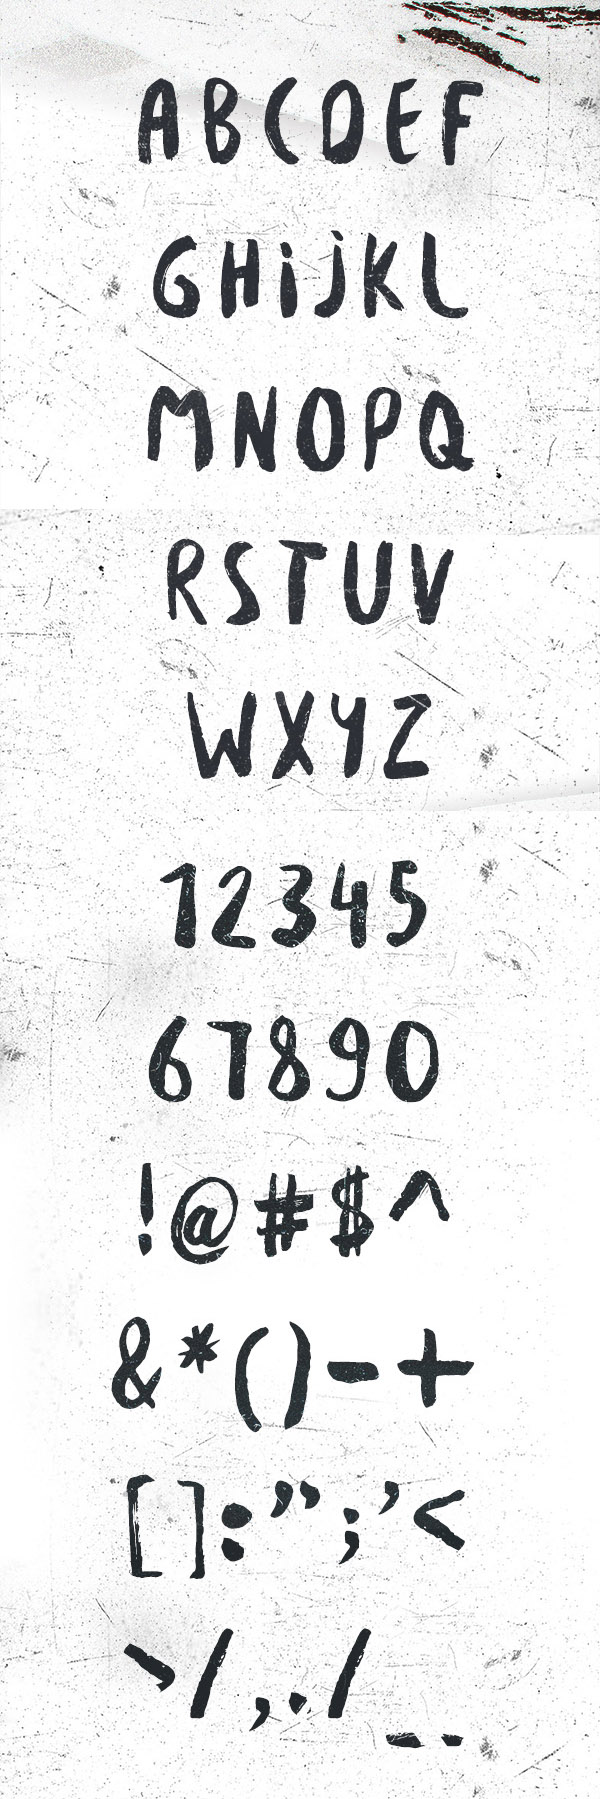 45 Free Hipster fonts - 3